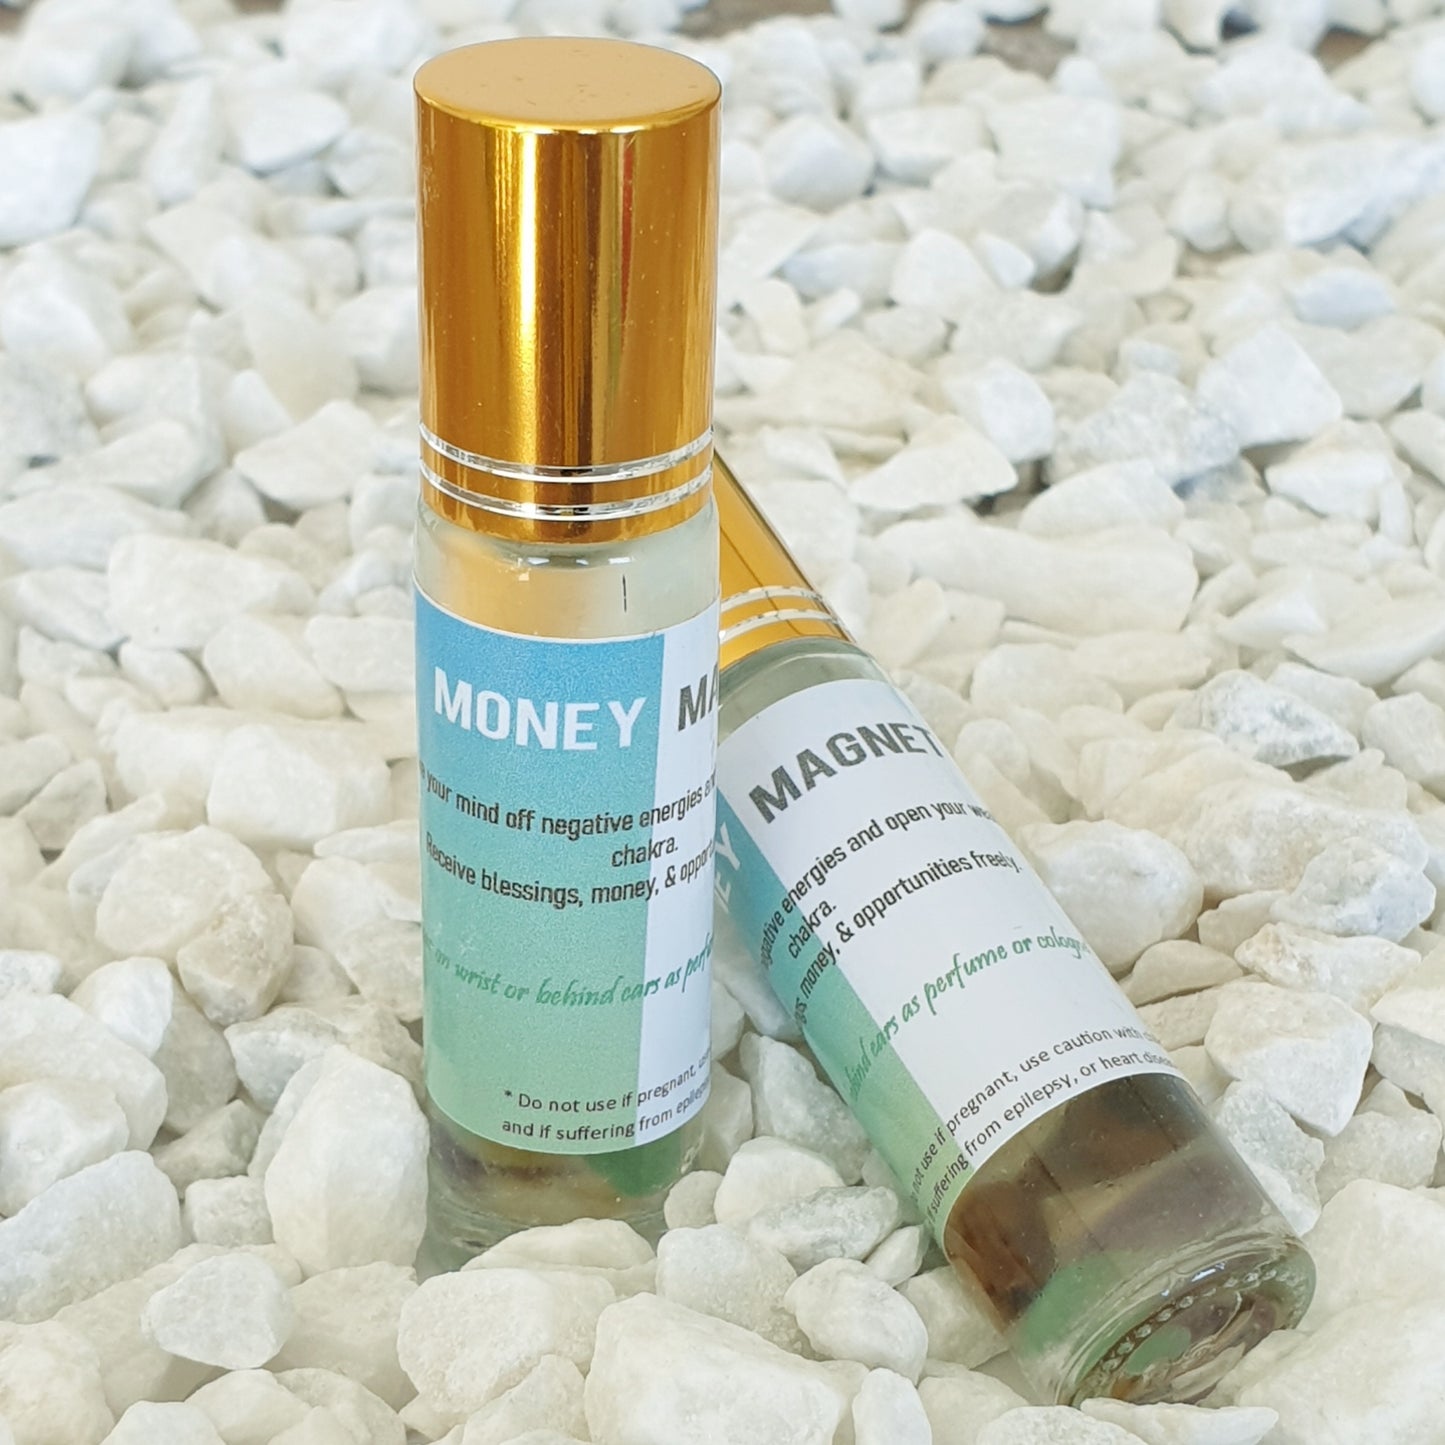 Bundle - A (Money Magnet Oil + Lucky Red String)